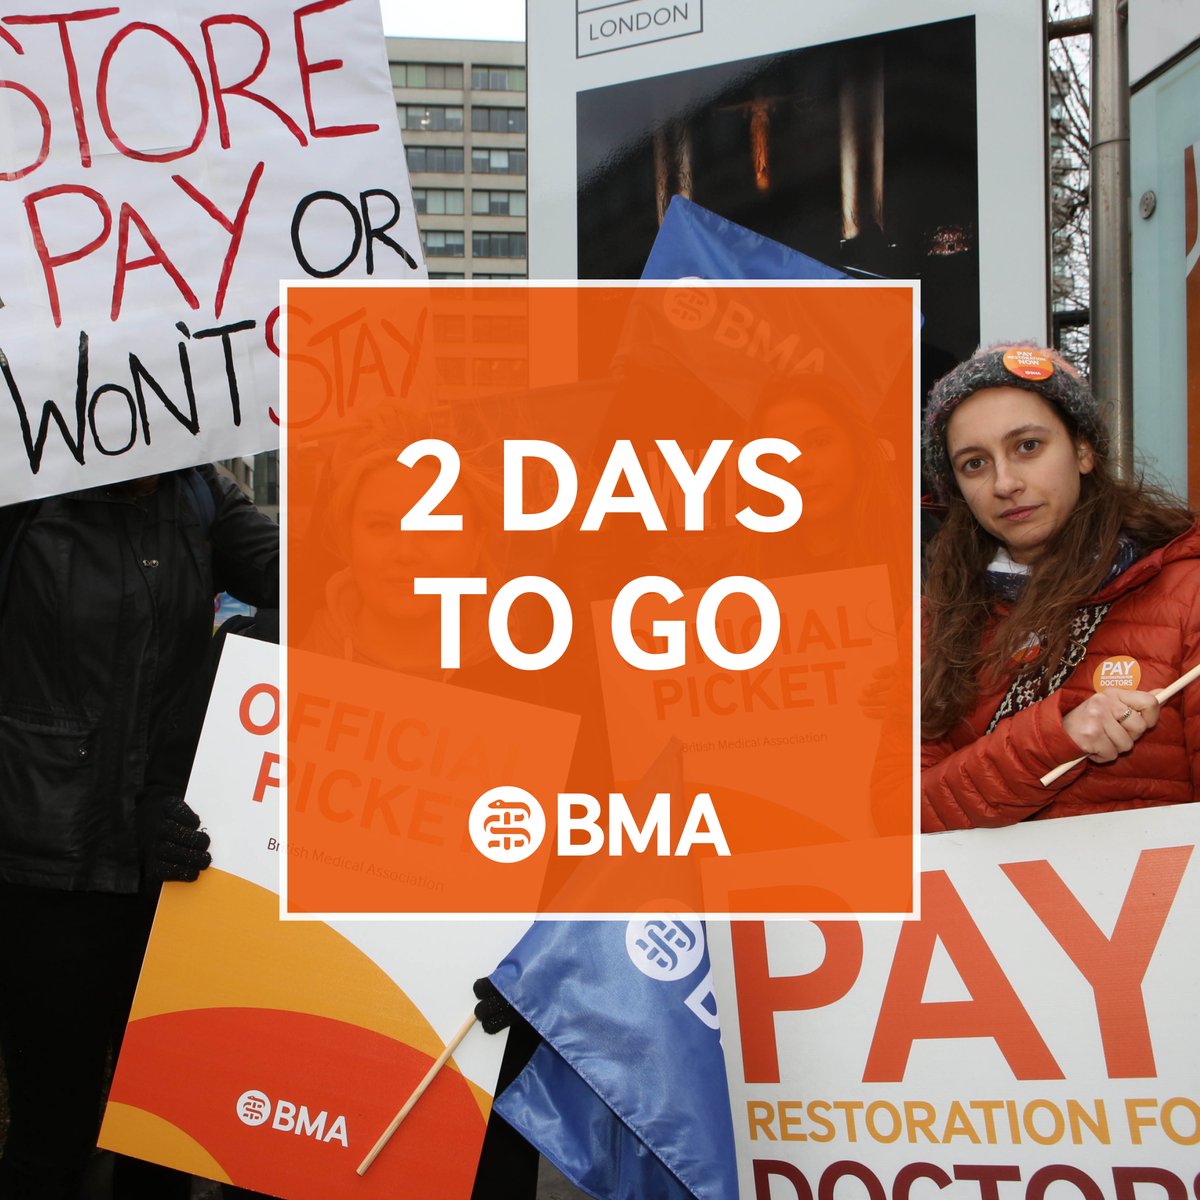 Junior doctors striking from Tuesday; you won't be acting alone. Plan to be on the picket lines with your colleagues on Tuesday - find your local event in England 👉 fal.cn/3xfKi #JuniorDoctorsStrike #PayRestoration